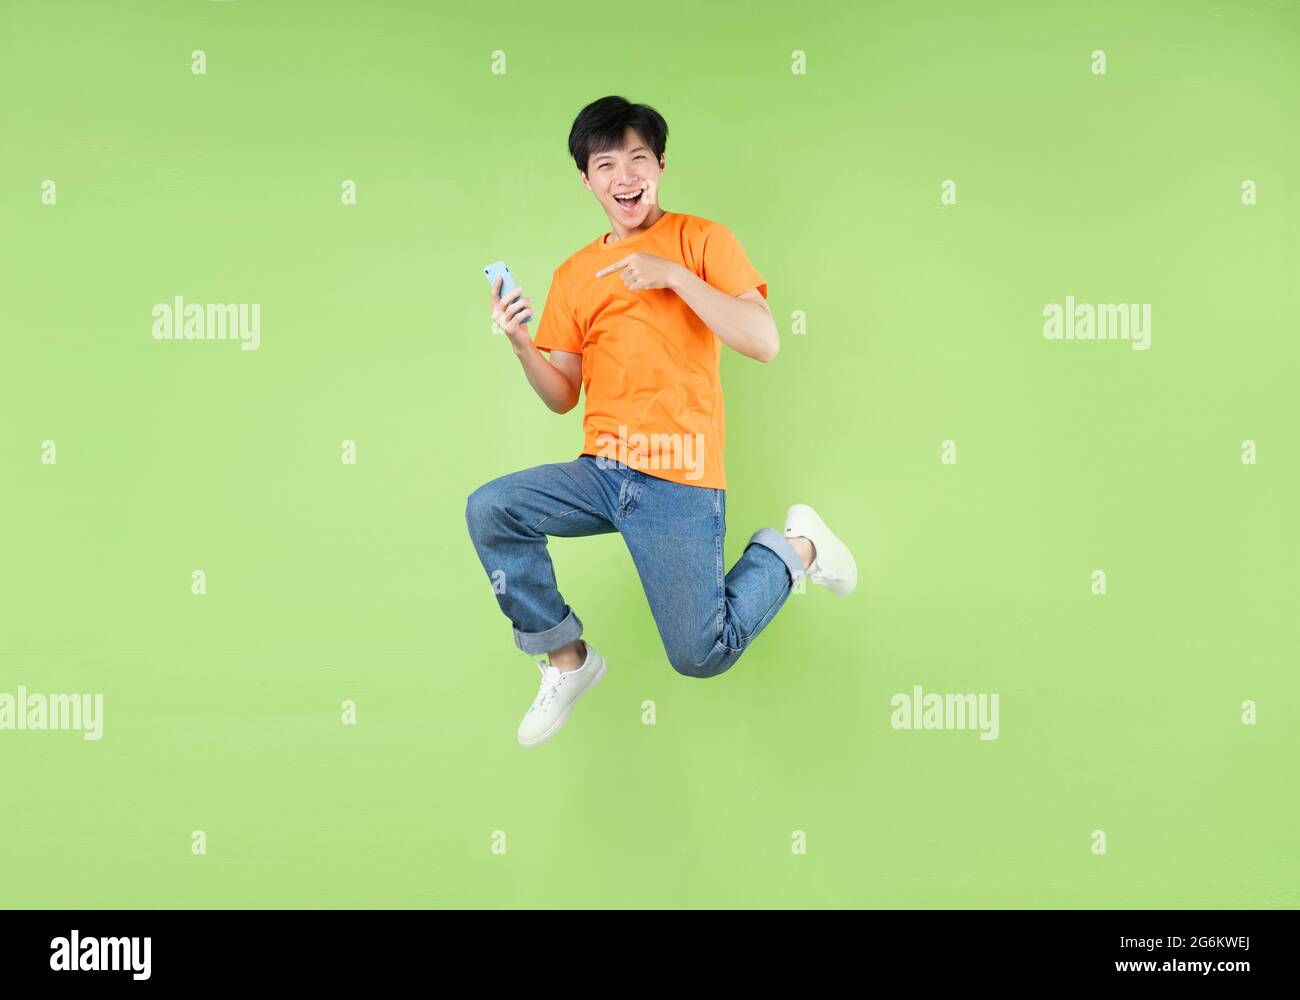 Asian man jumping and holding smartphone , isolated on green Stock Photo